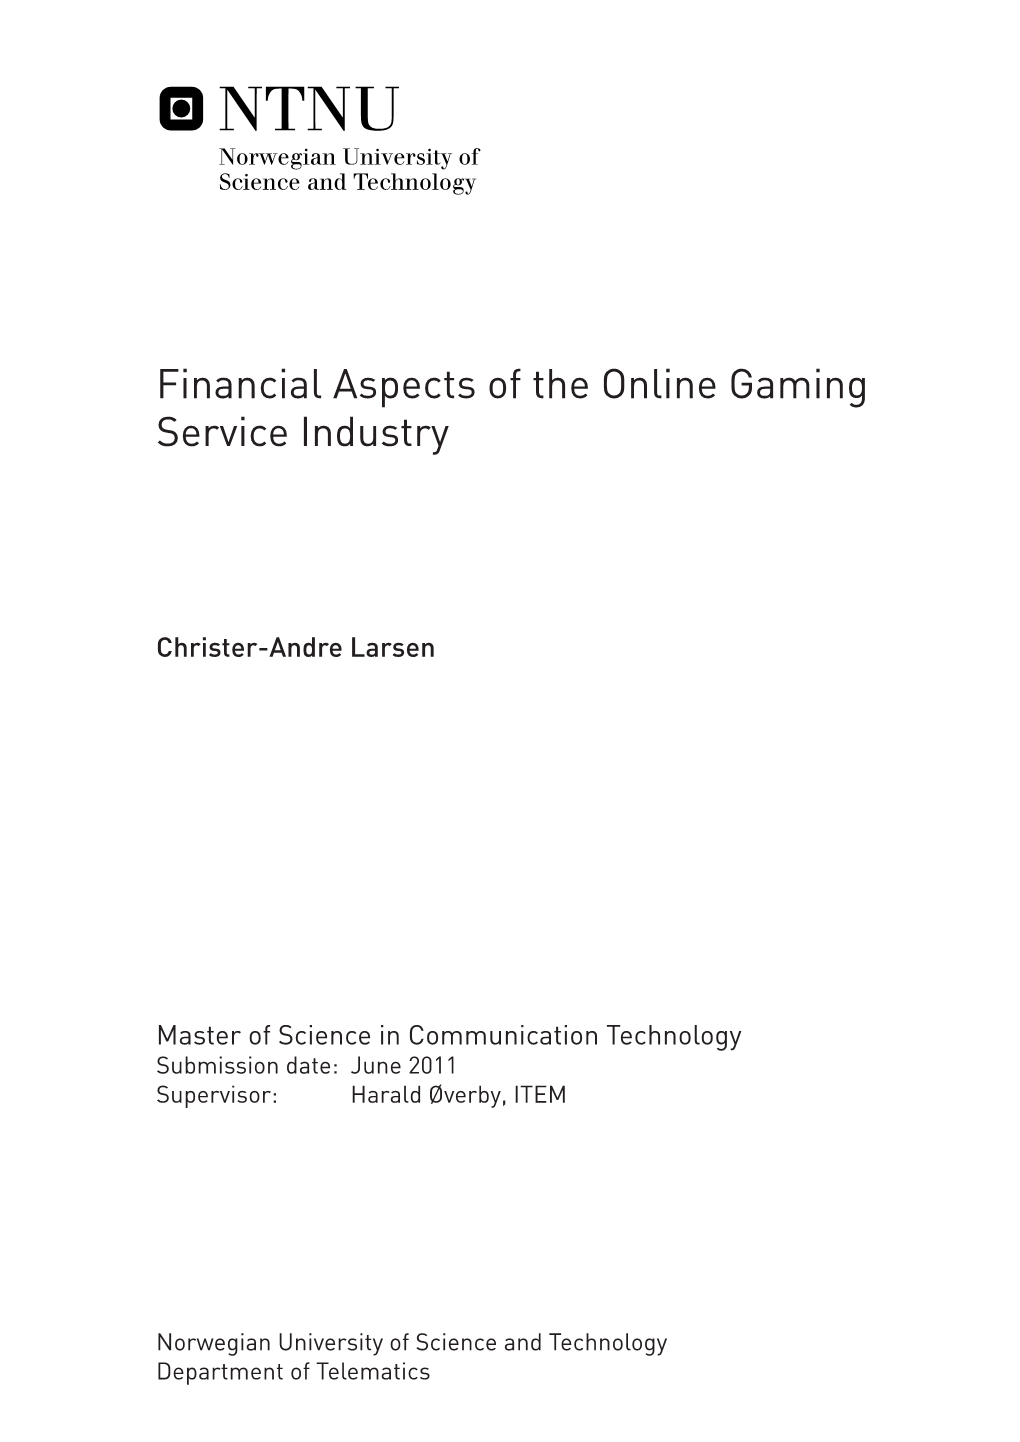 Financial Aspects of the Online Gaming Service Industry